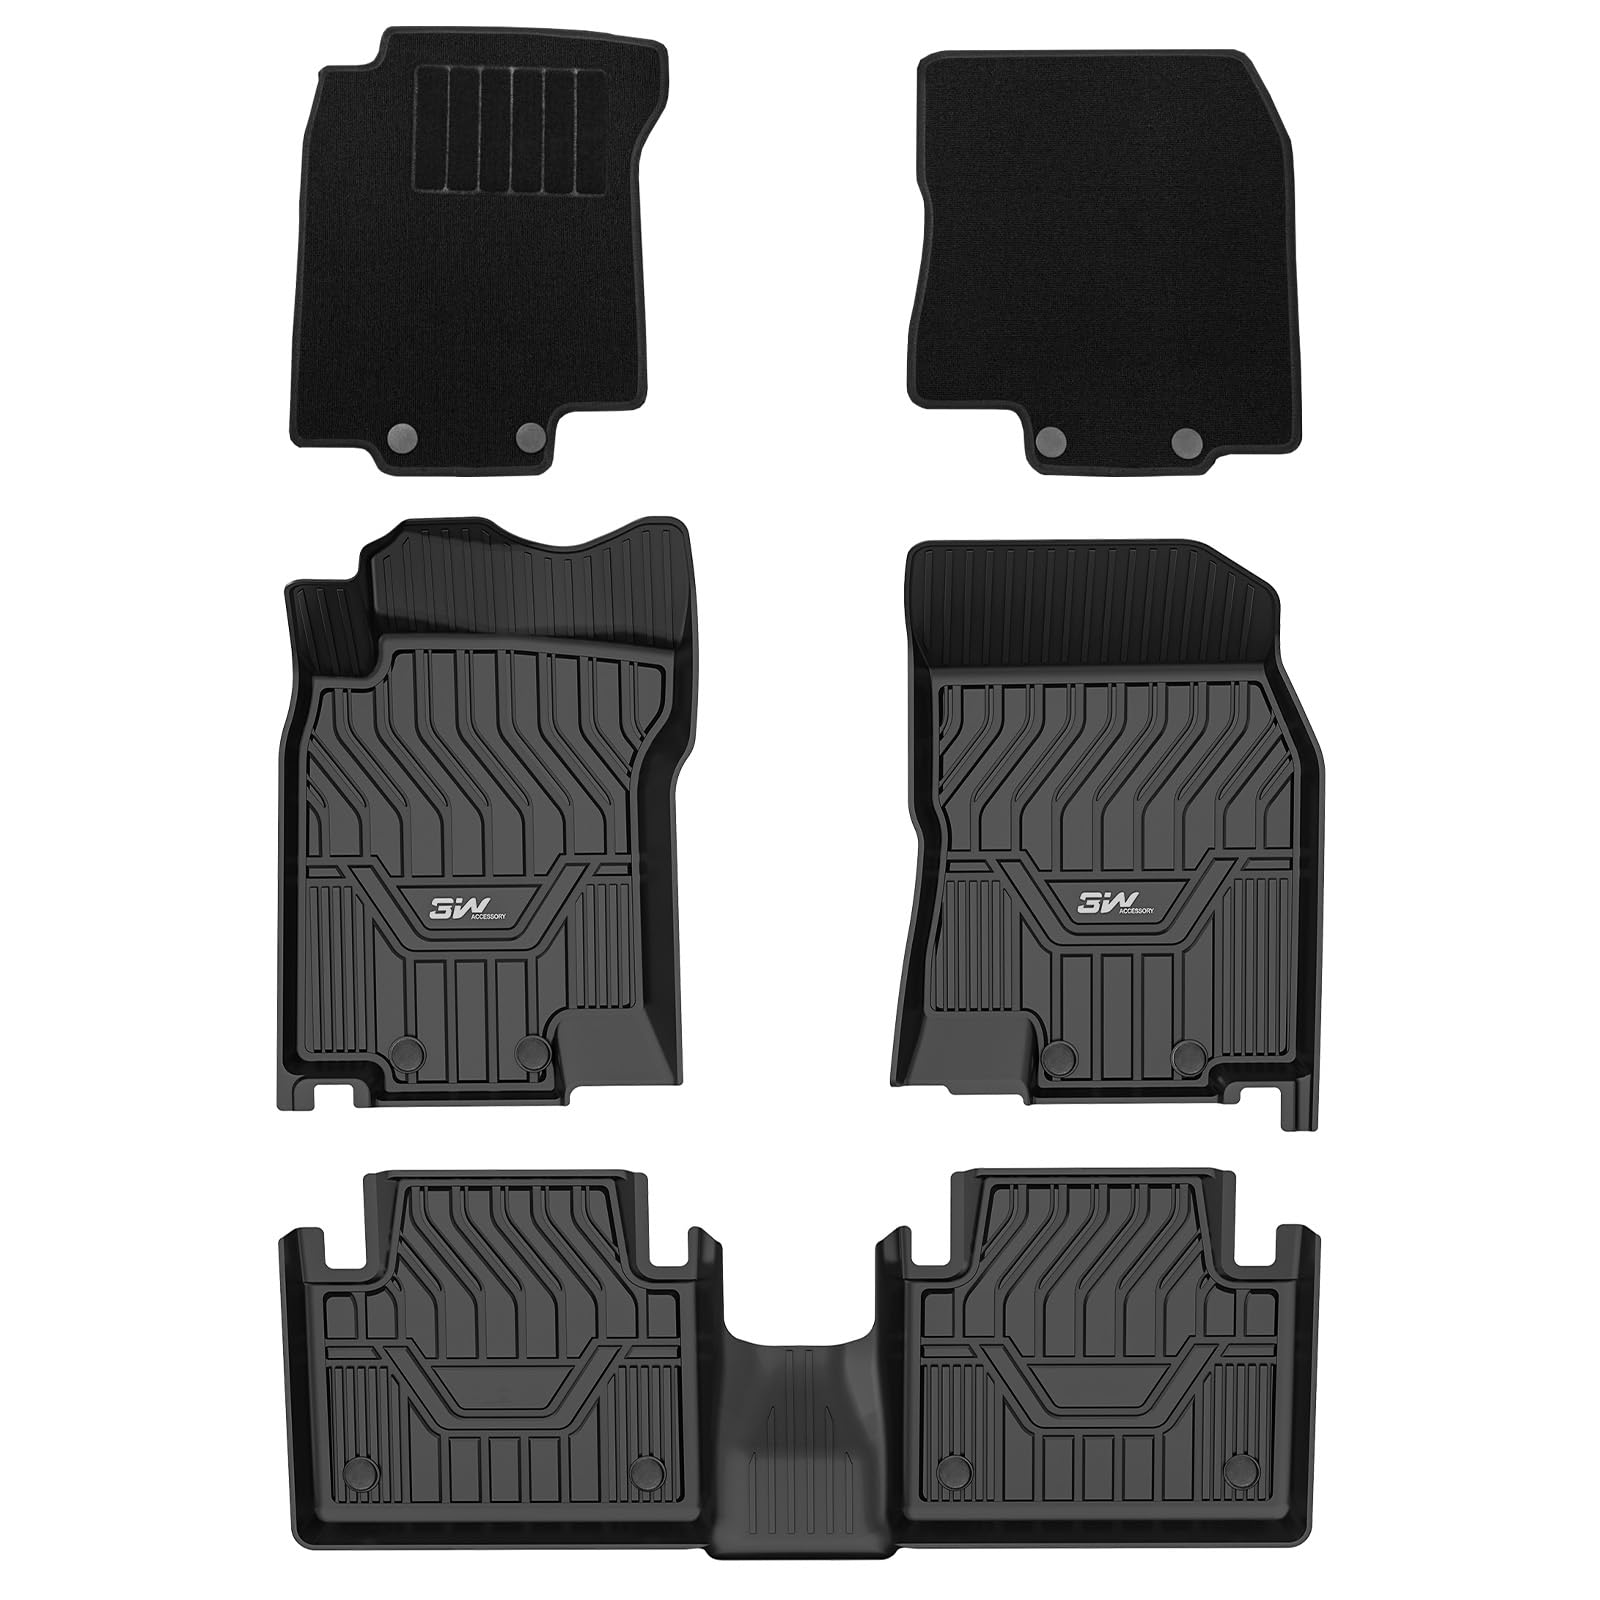 3W Acura RDX 2019-2024 Custom Floor Mats TPE Material & All-Weather Protection Vehicles & Parts 3W 2019-2024 RDX 2019-2024 1st&2nd Row with Carpets